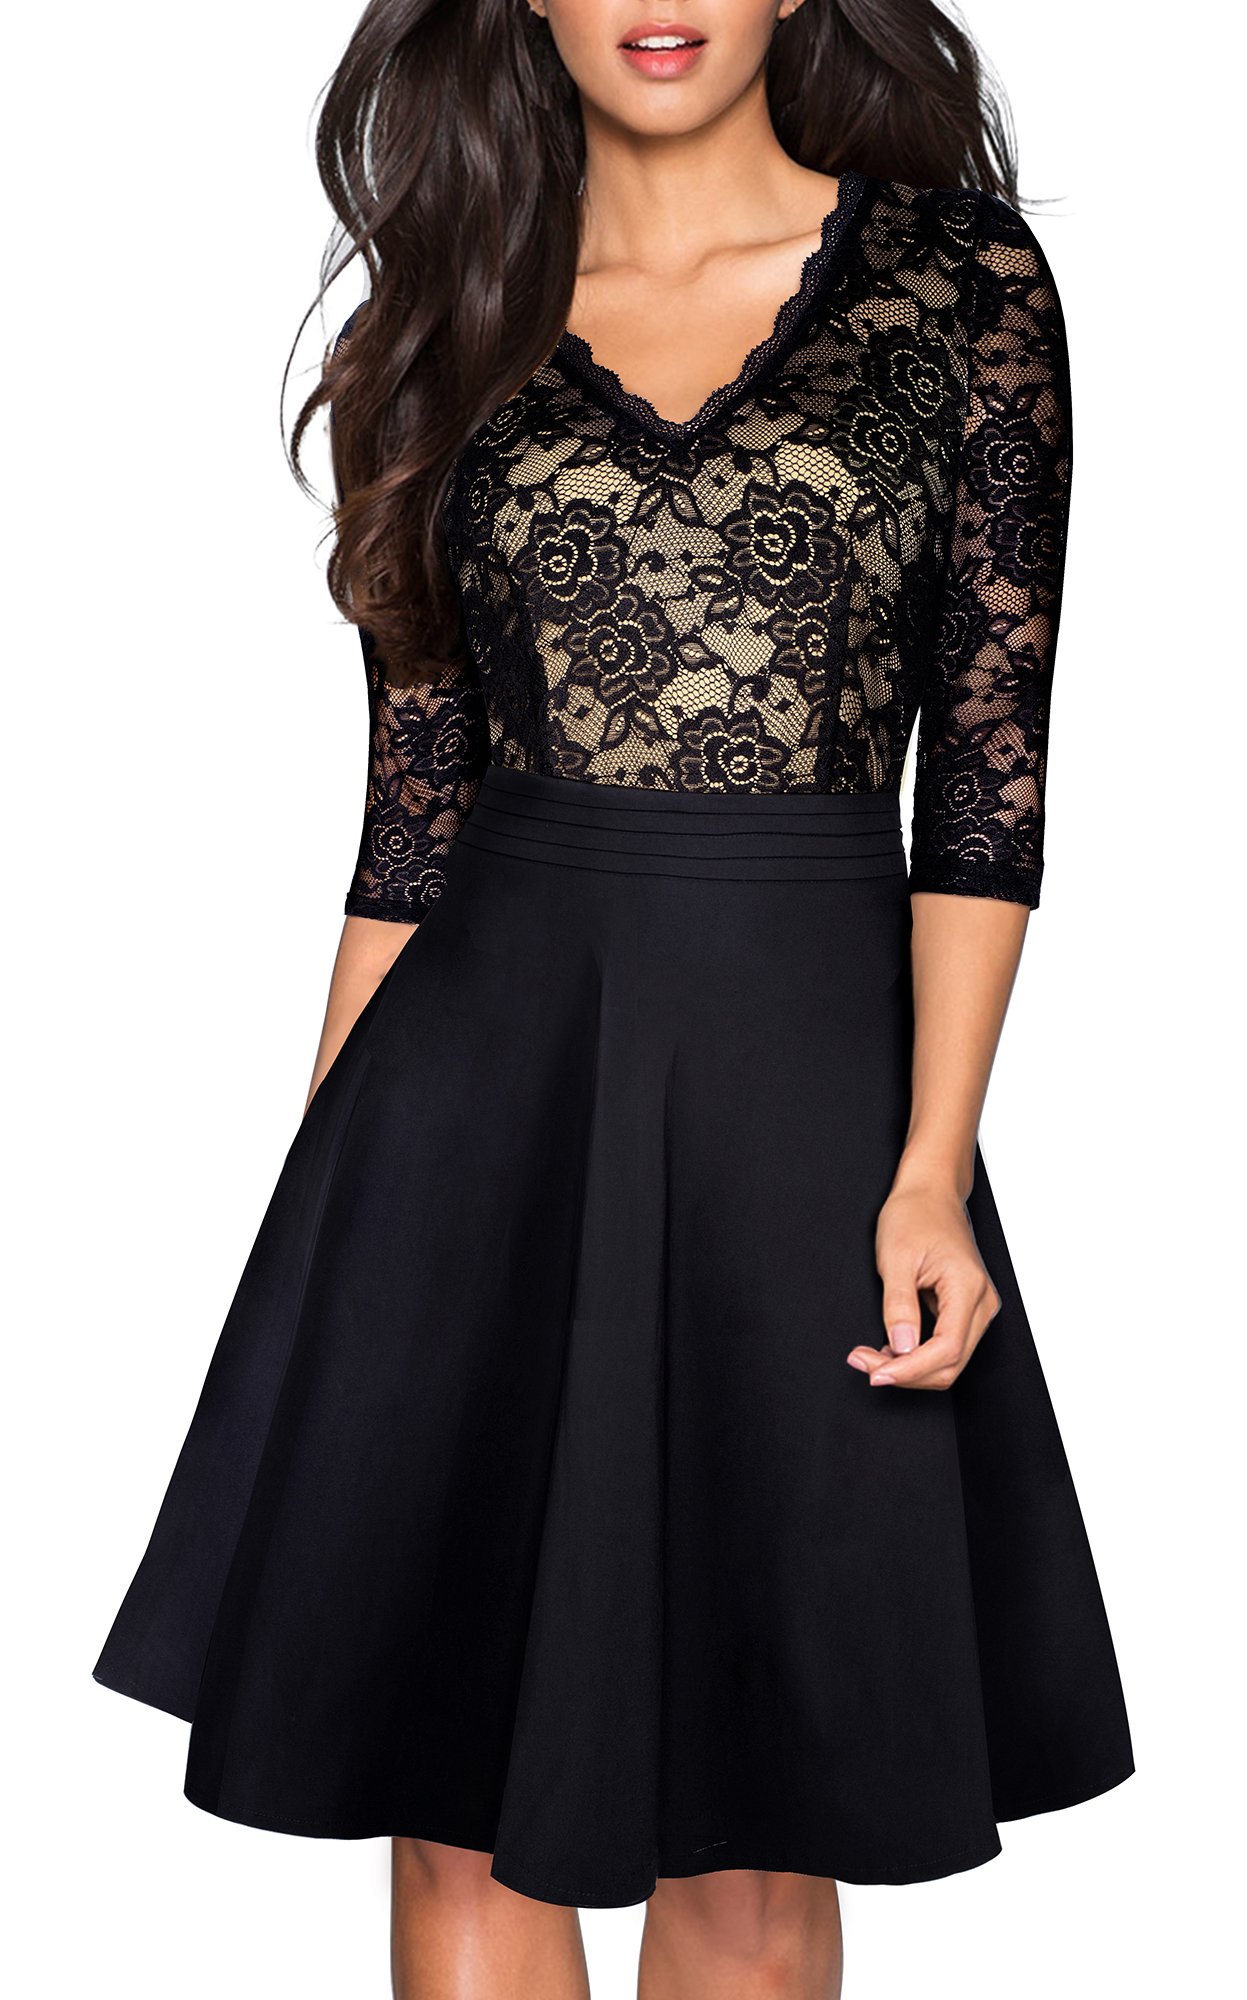 HOMEYEE Women's Chic V-Neck Lace Patchwork Flare Party Dress A062